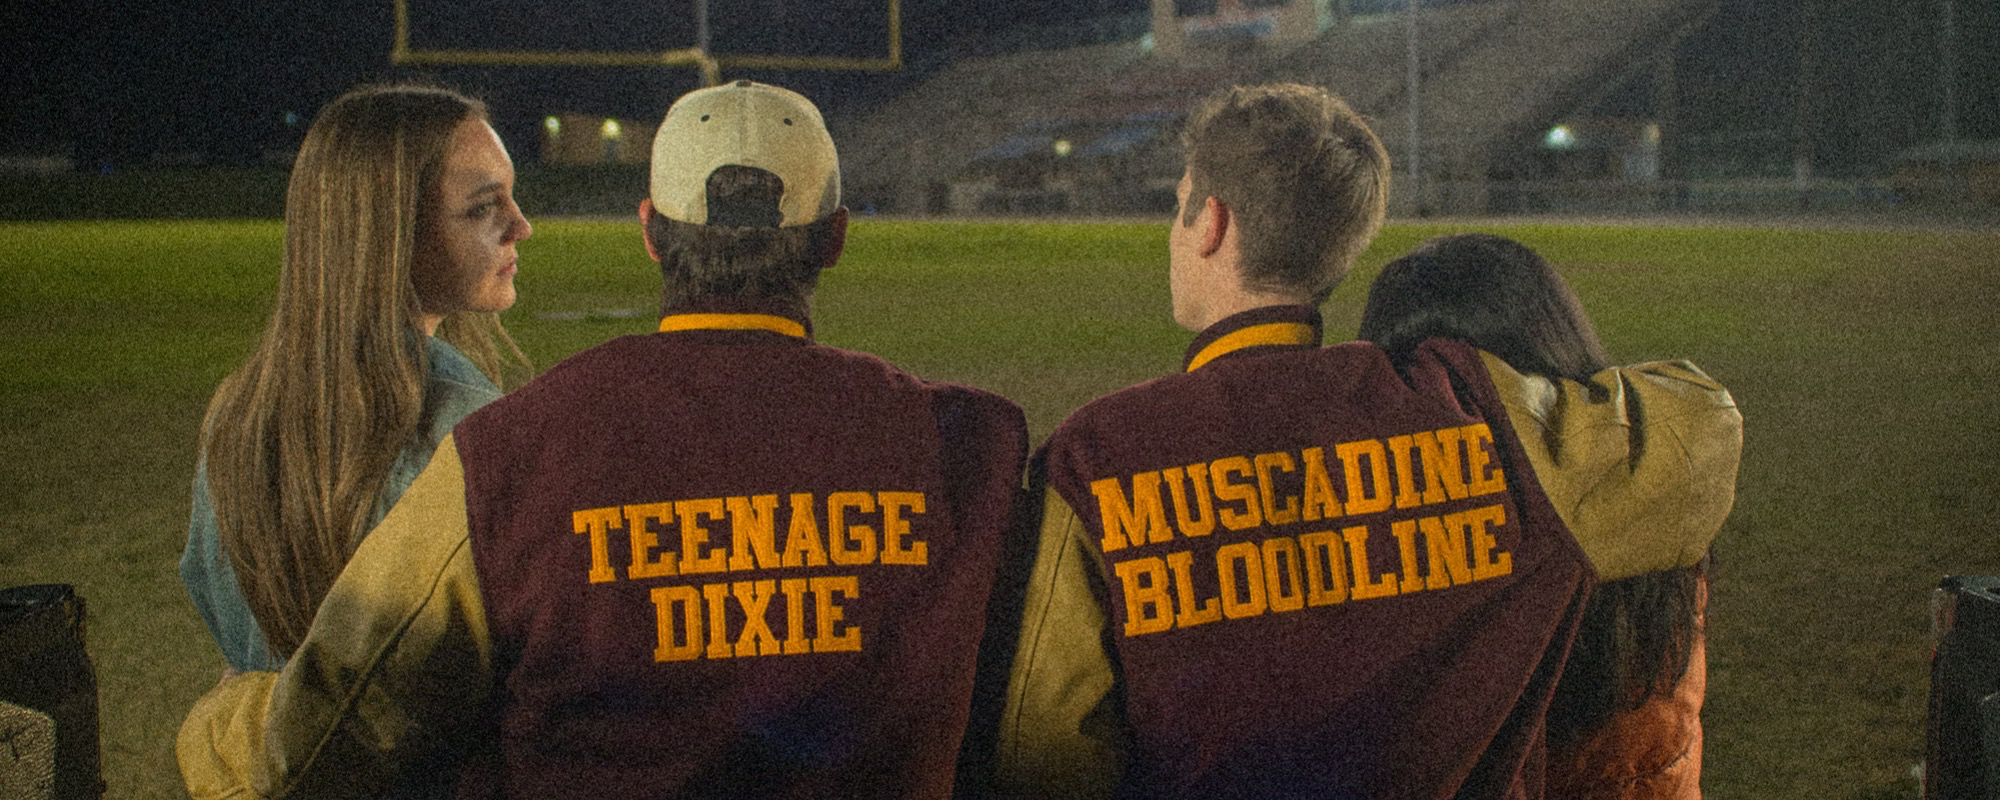 Muscadine Bloodline Play From Memory on ‘Teenage Dixie’